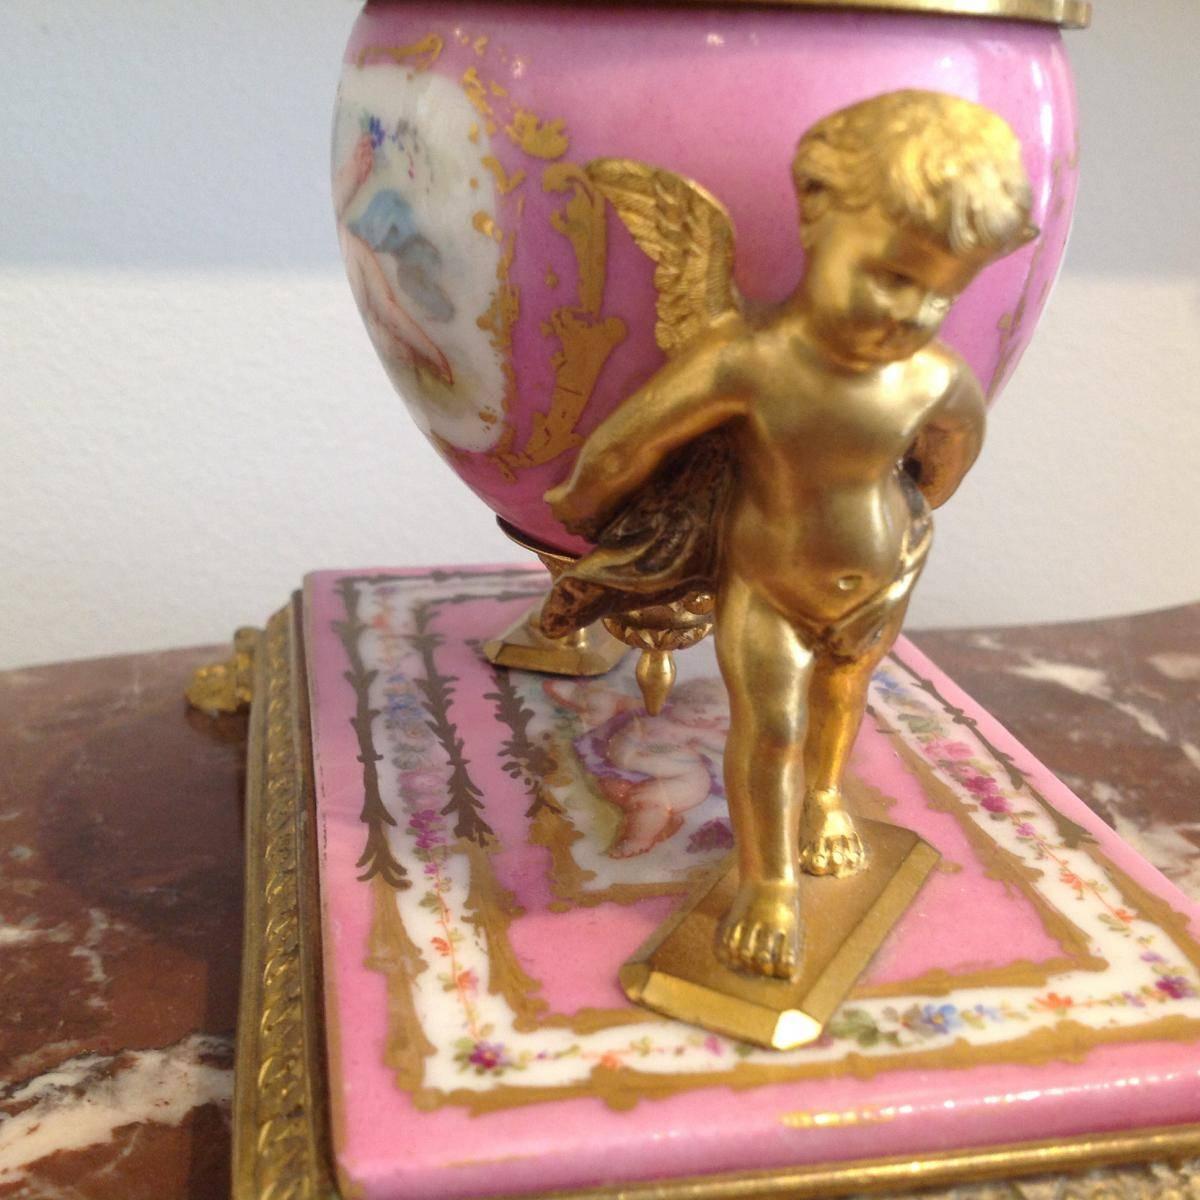 Gilt bronze and porcelain inkwell of Napoleon III period.
A porcelain terrace with a cartridge in the center representing love, surrounded by a floral border.
The porcelain plate is framed with gilded bronze and rest on four feet with claws.
The